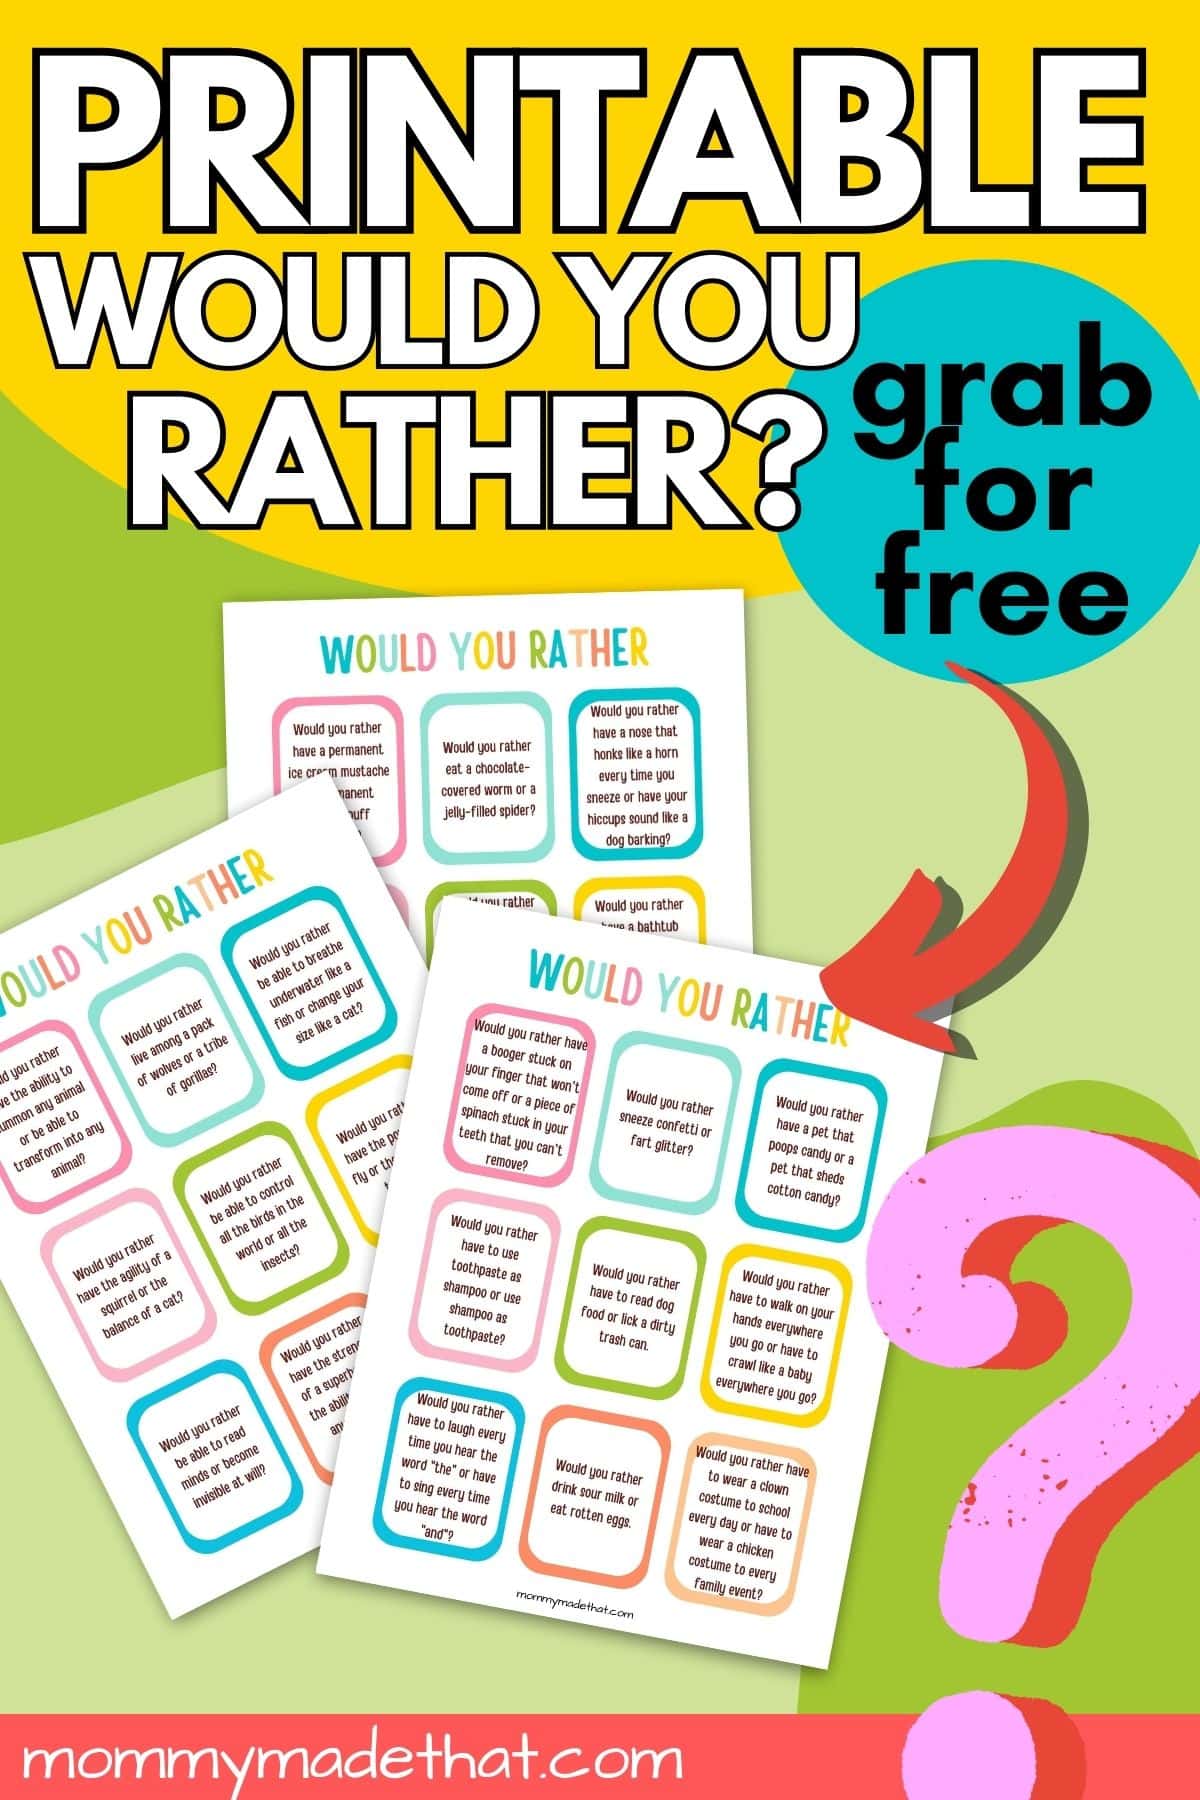 Would you rather questions for kids